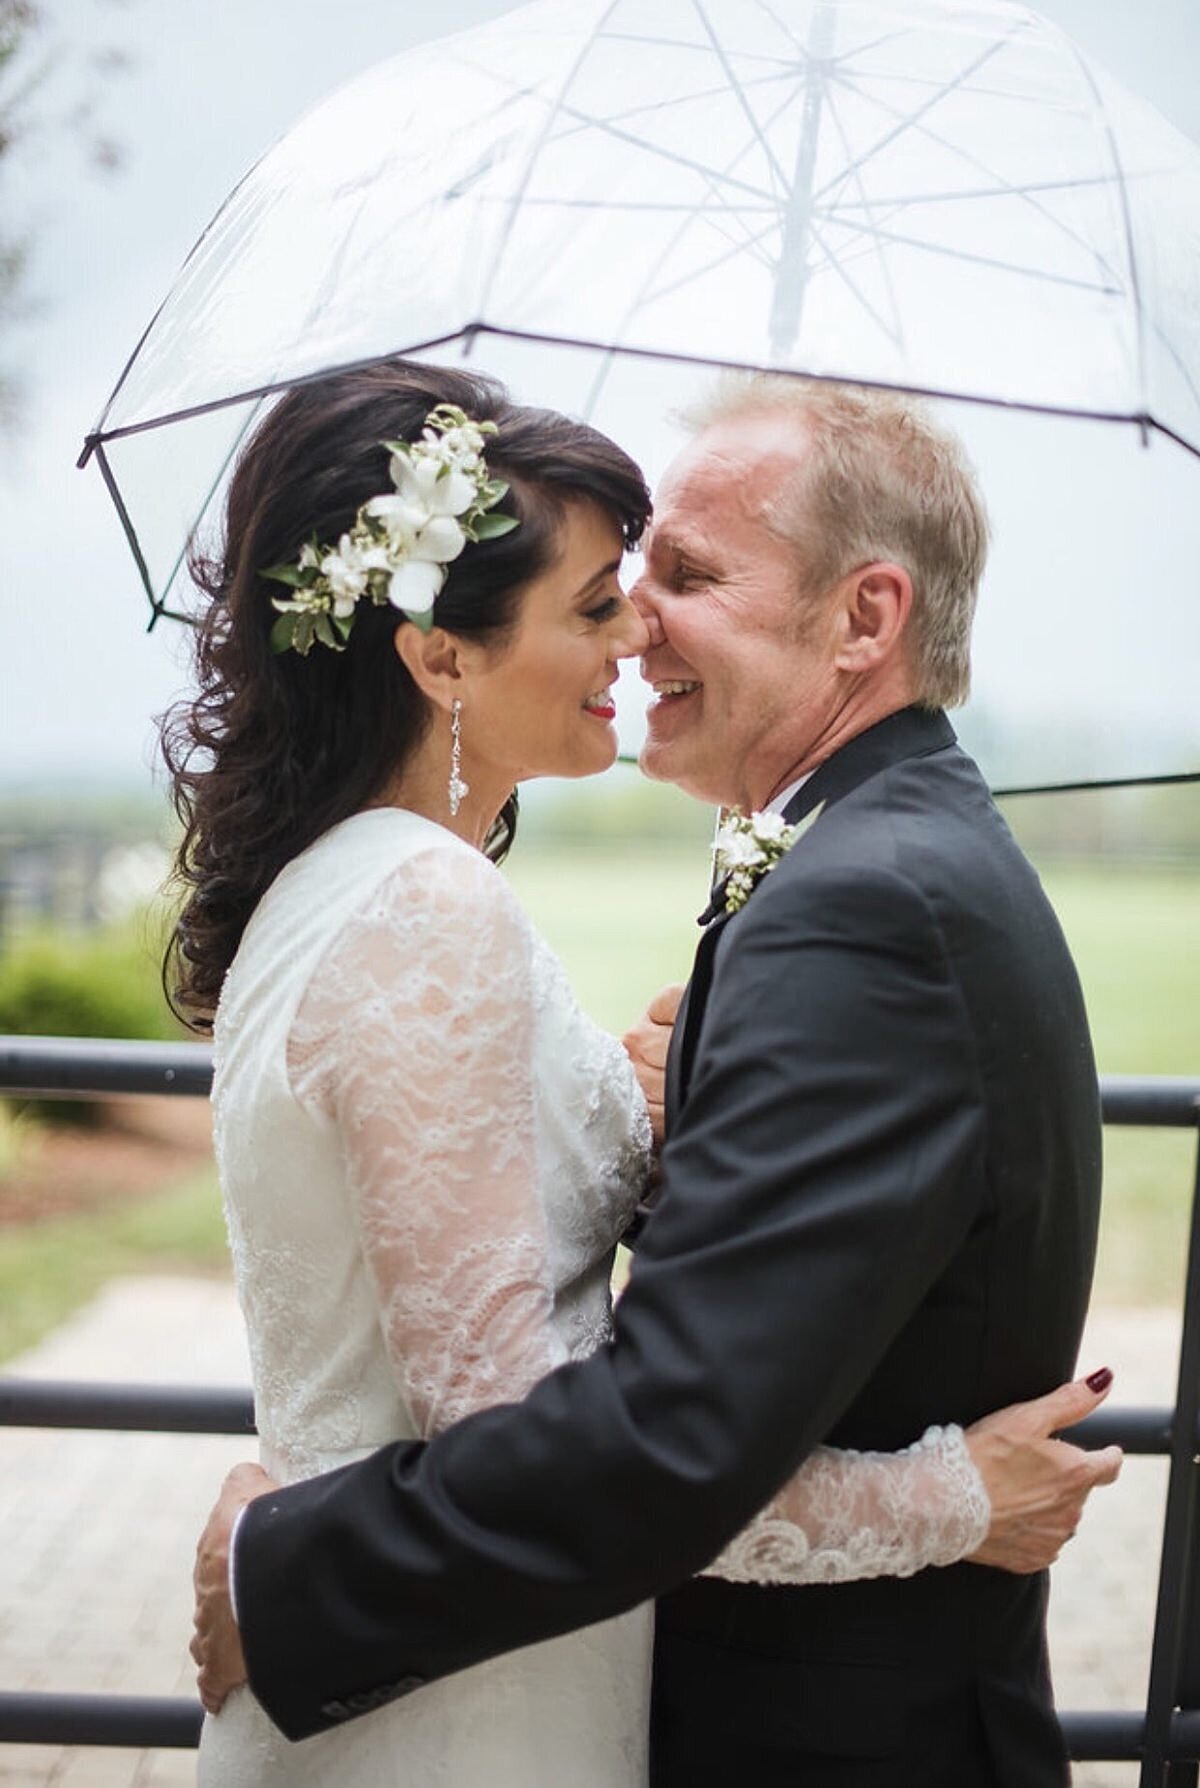 The bride, wearing a white suit with lace sleeves and the groom in a dark gray suit, embrace and kiss under a clear umbrella in the rain